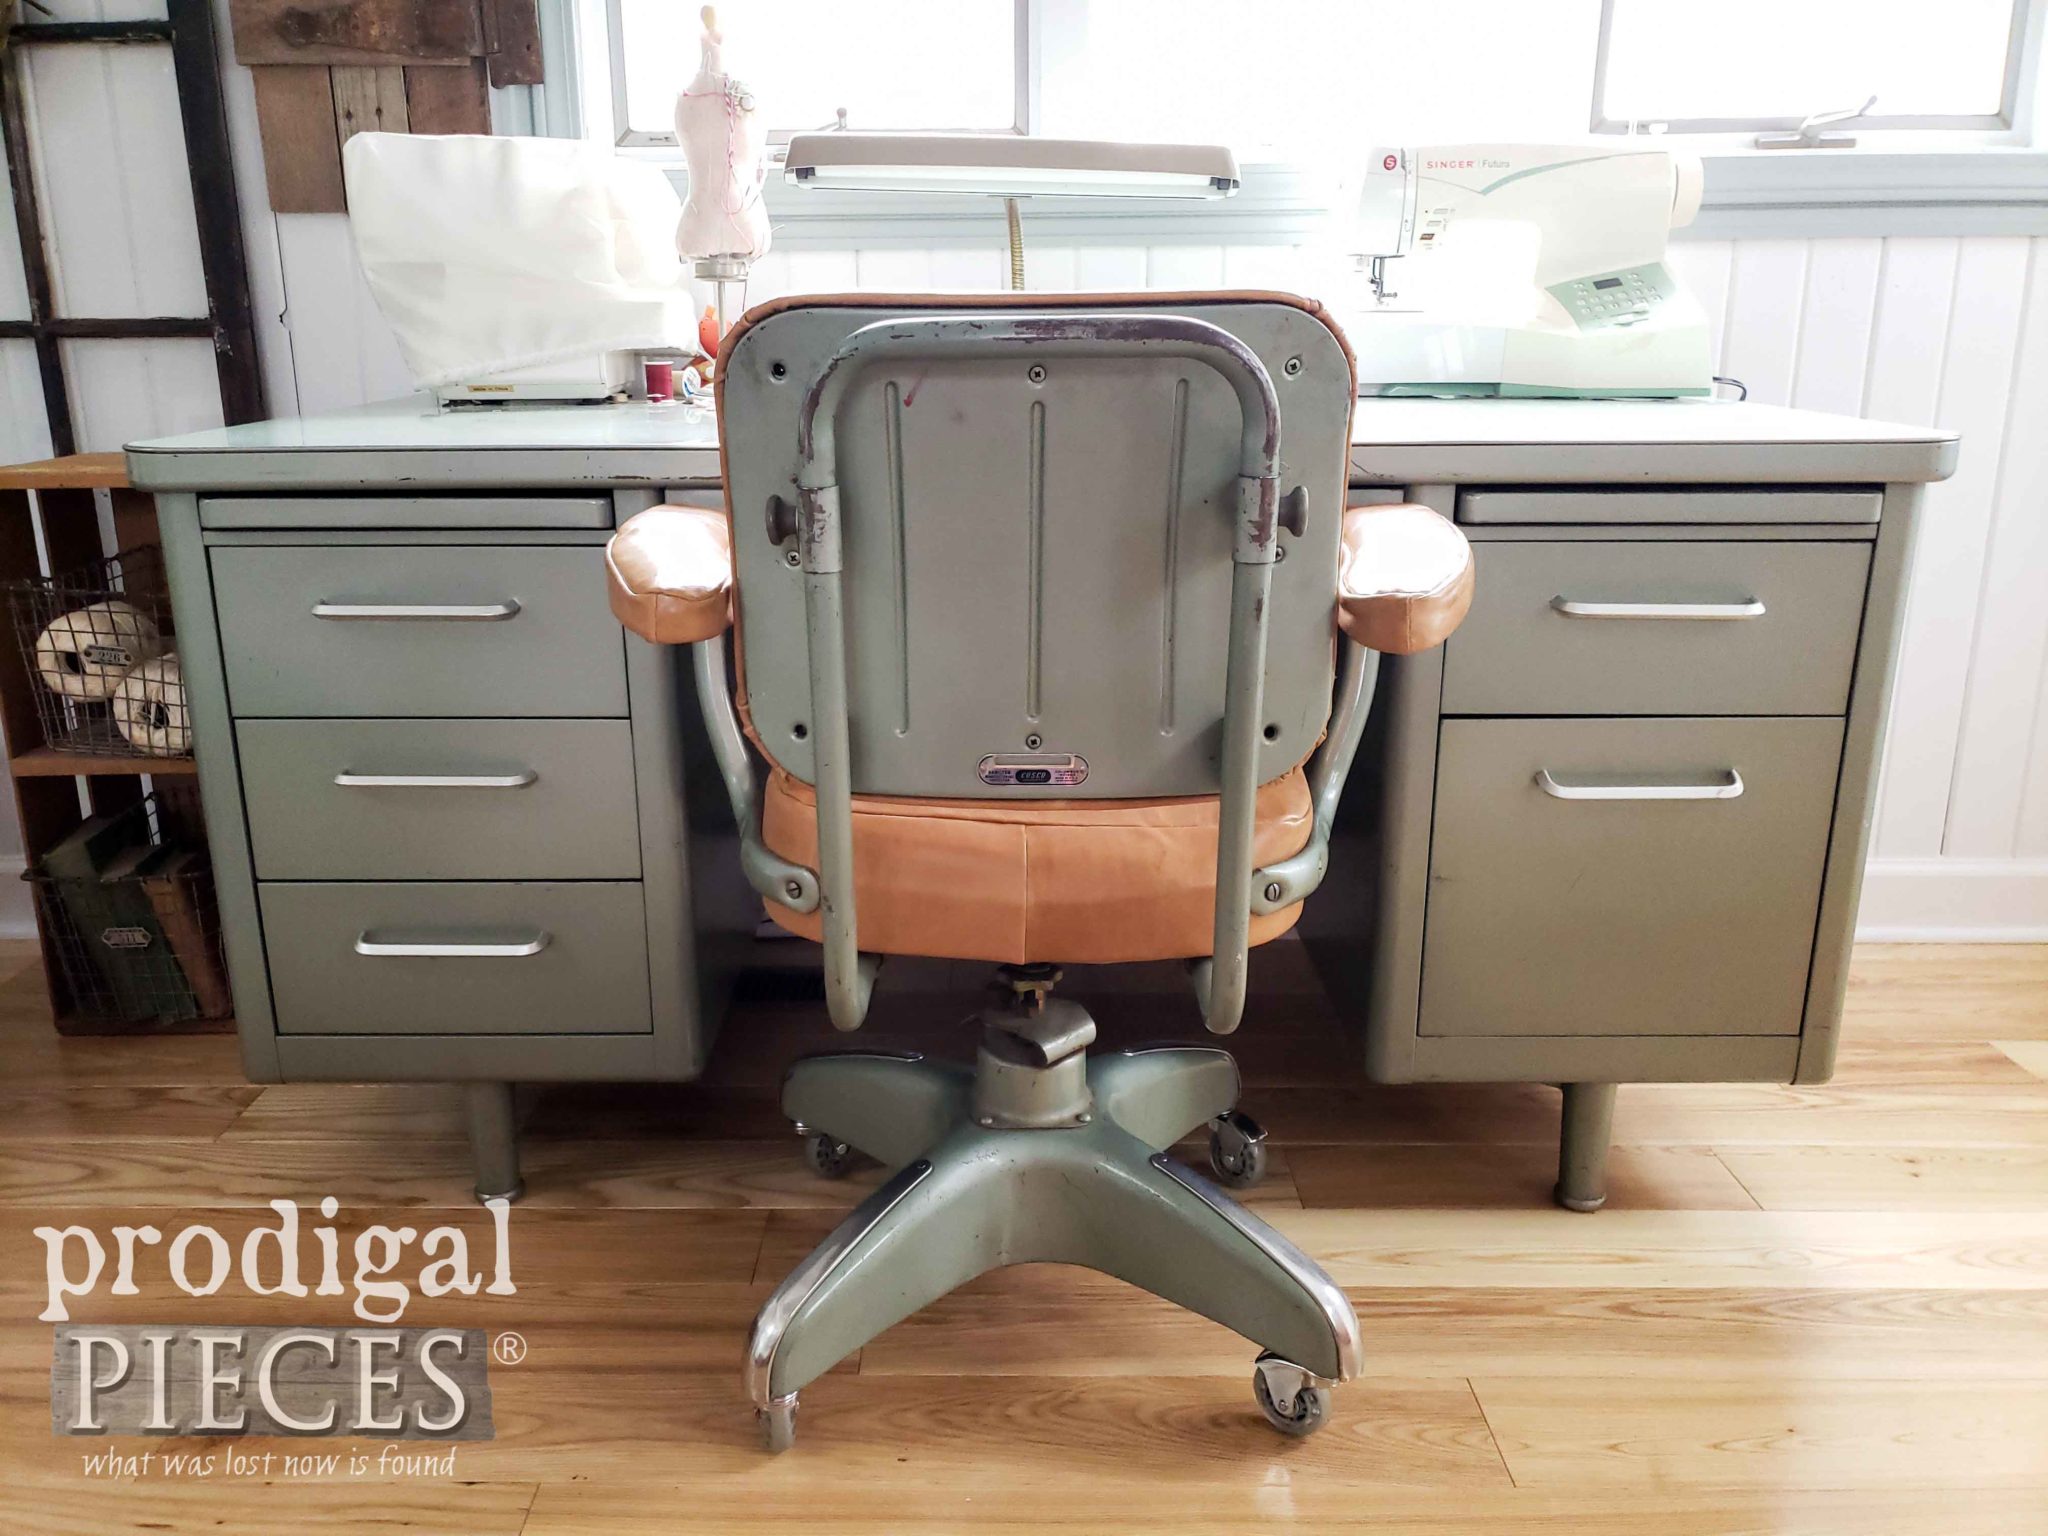 Vintage Industrial Office Desk Set with Leather Chair | All Found on the Curb or in a Thrift Store by Larissa of Prodigal Pieces | prodigalpieces.com #prodigalpieces #trashure #diy #home #furniture #homedecor #vintage #retro